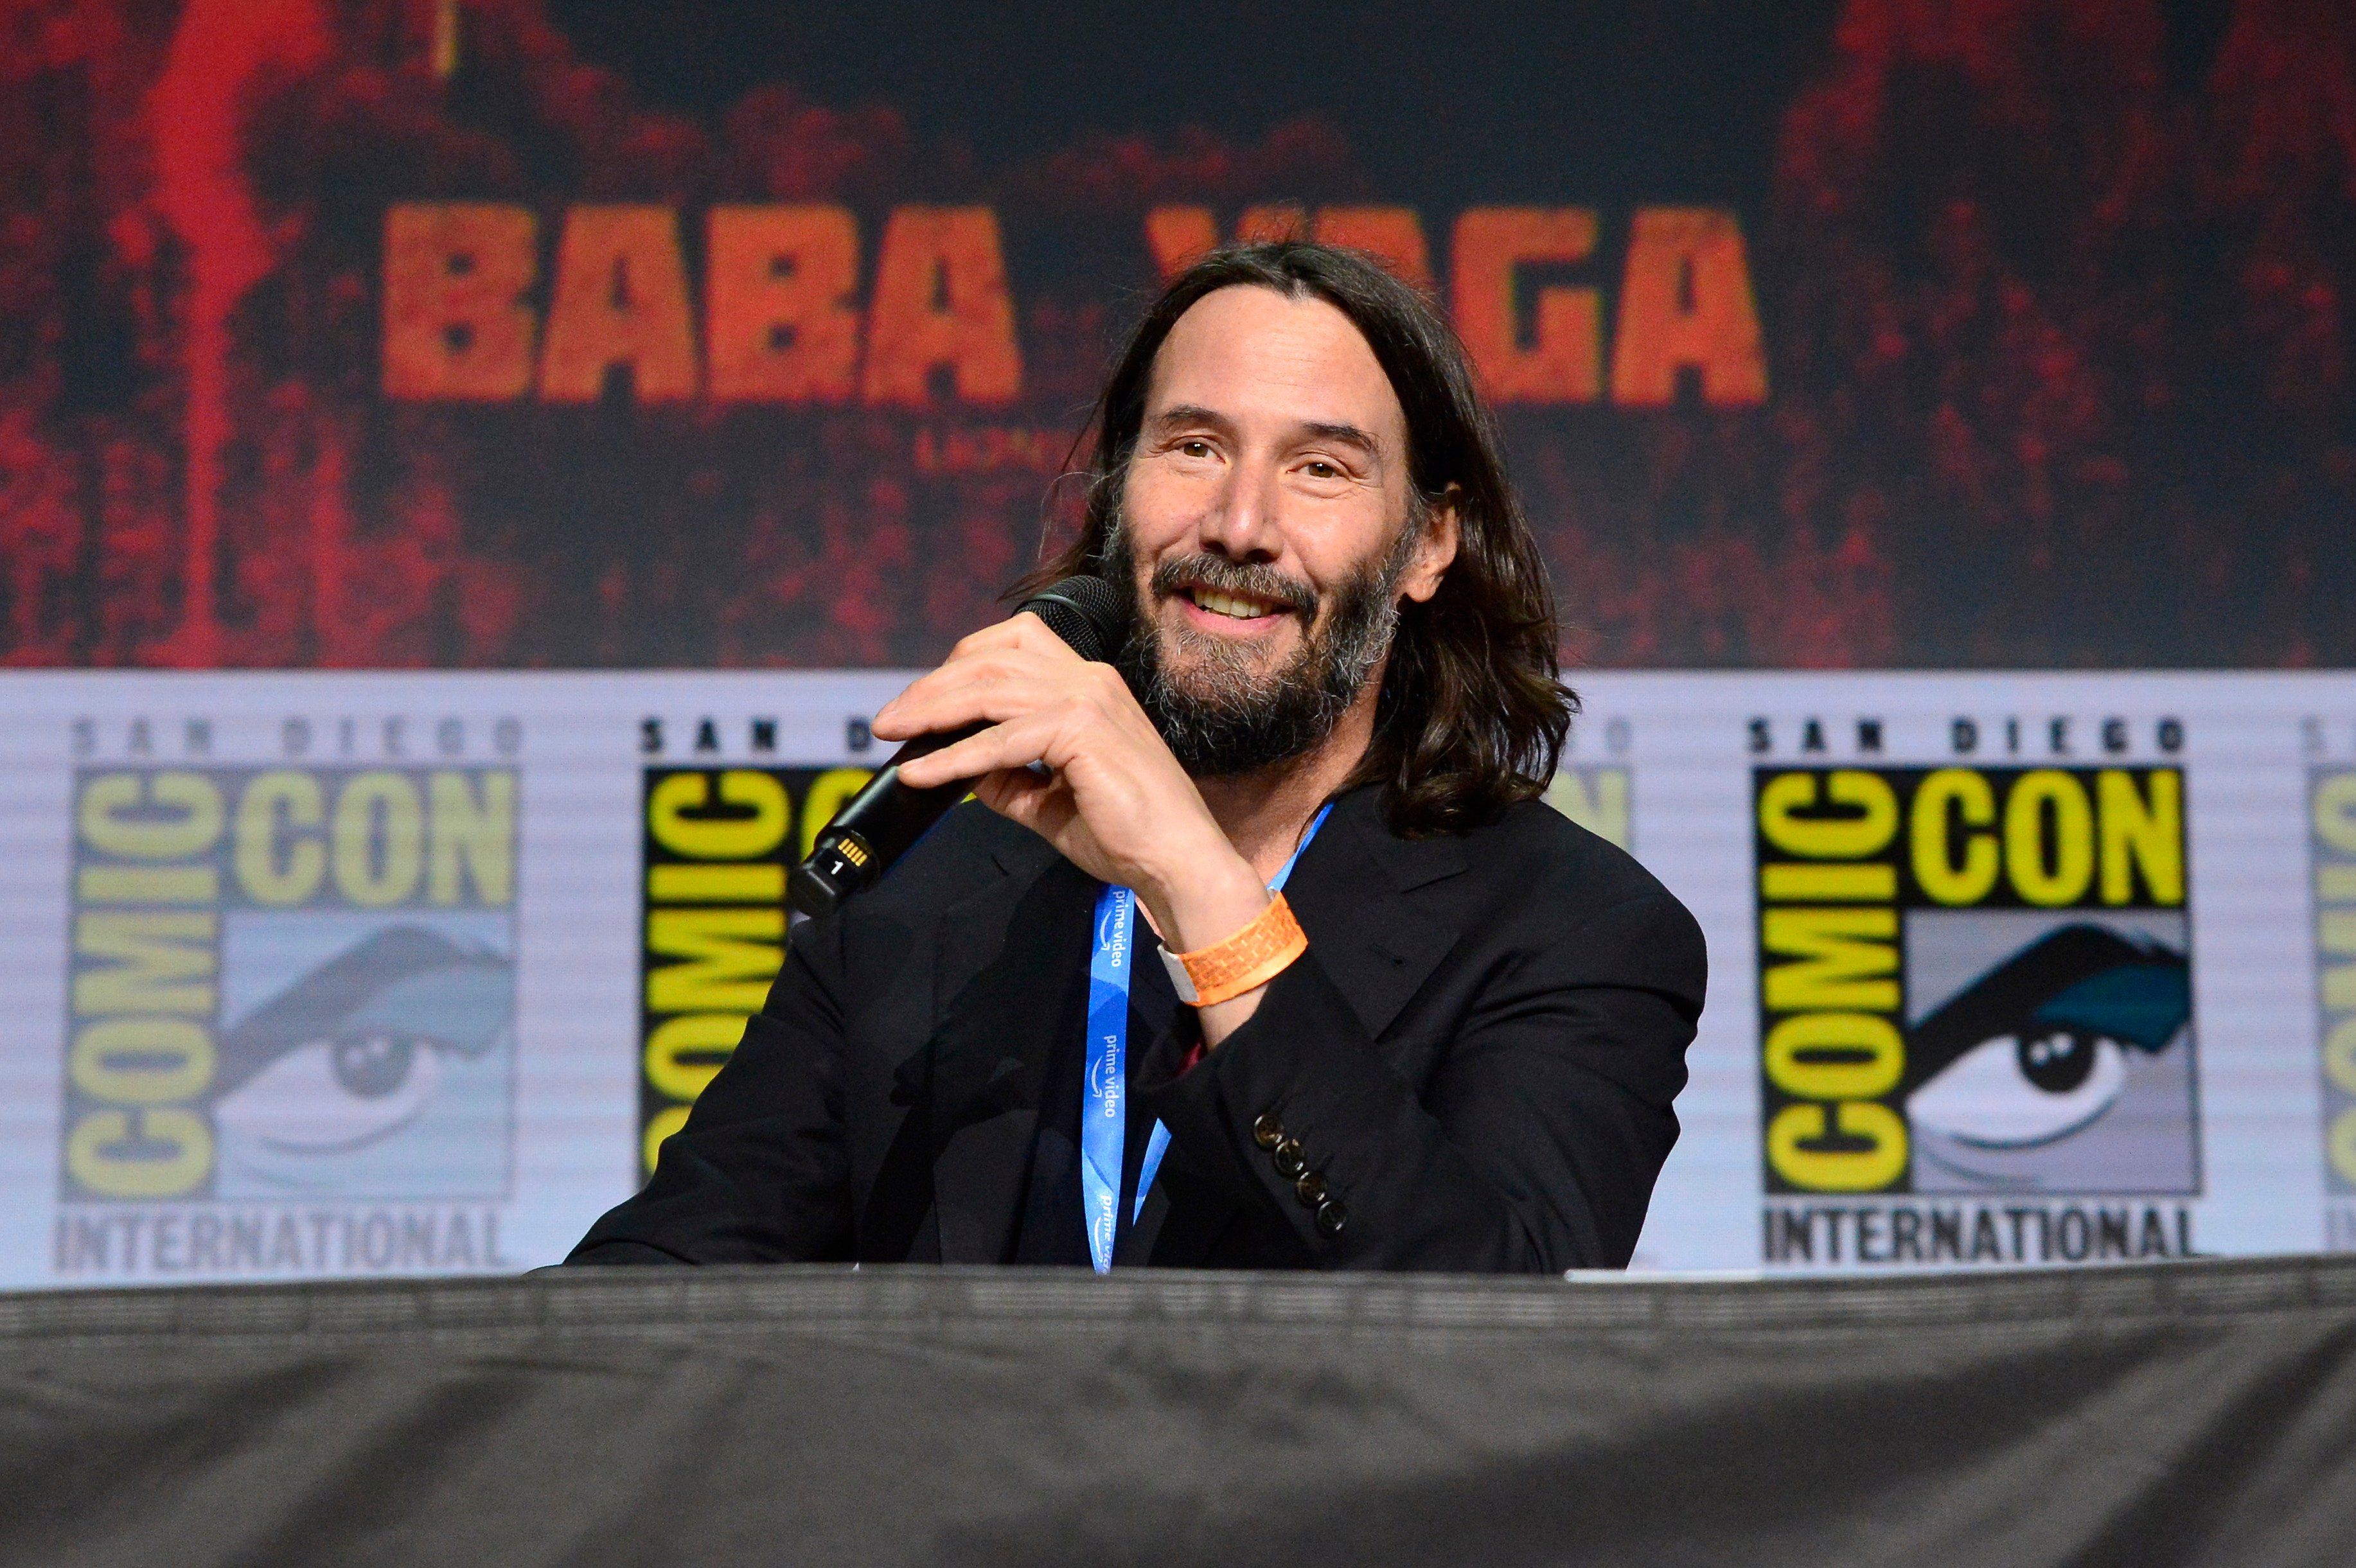 Keanu Reeves speaking during a panel at 2022 San Diego Comic-Con